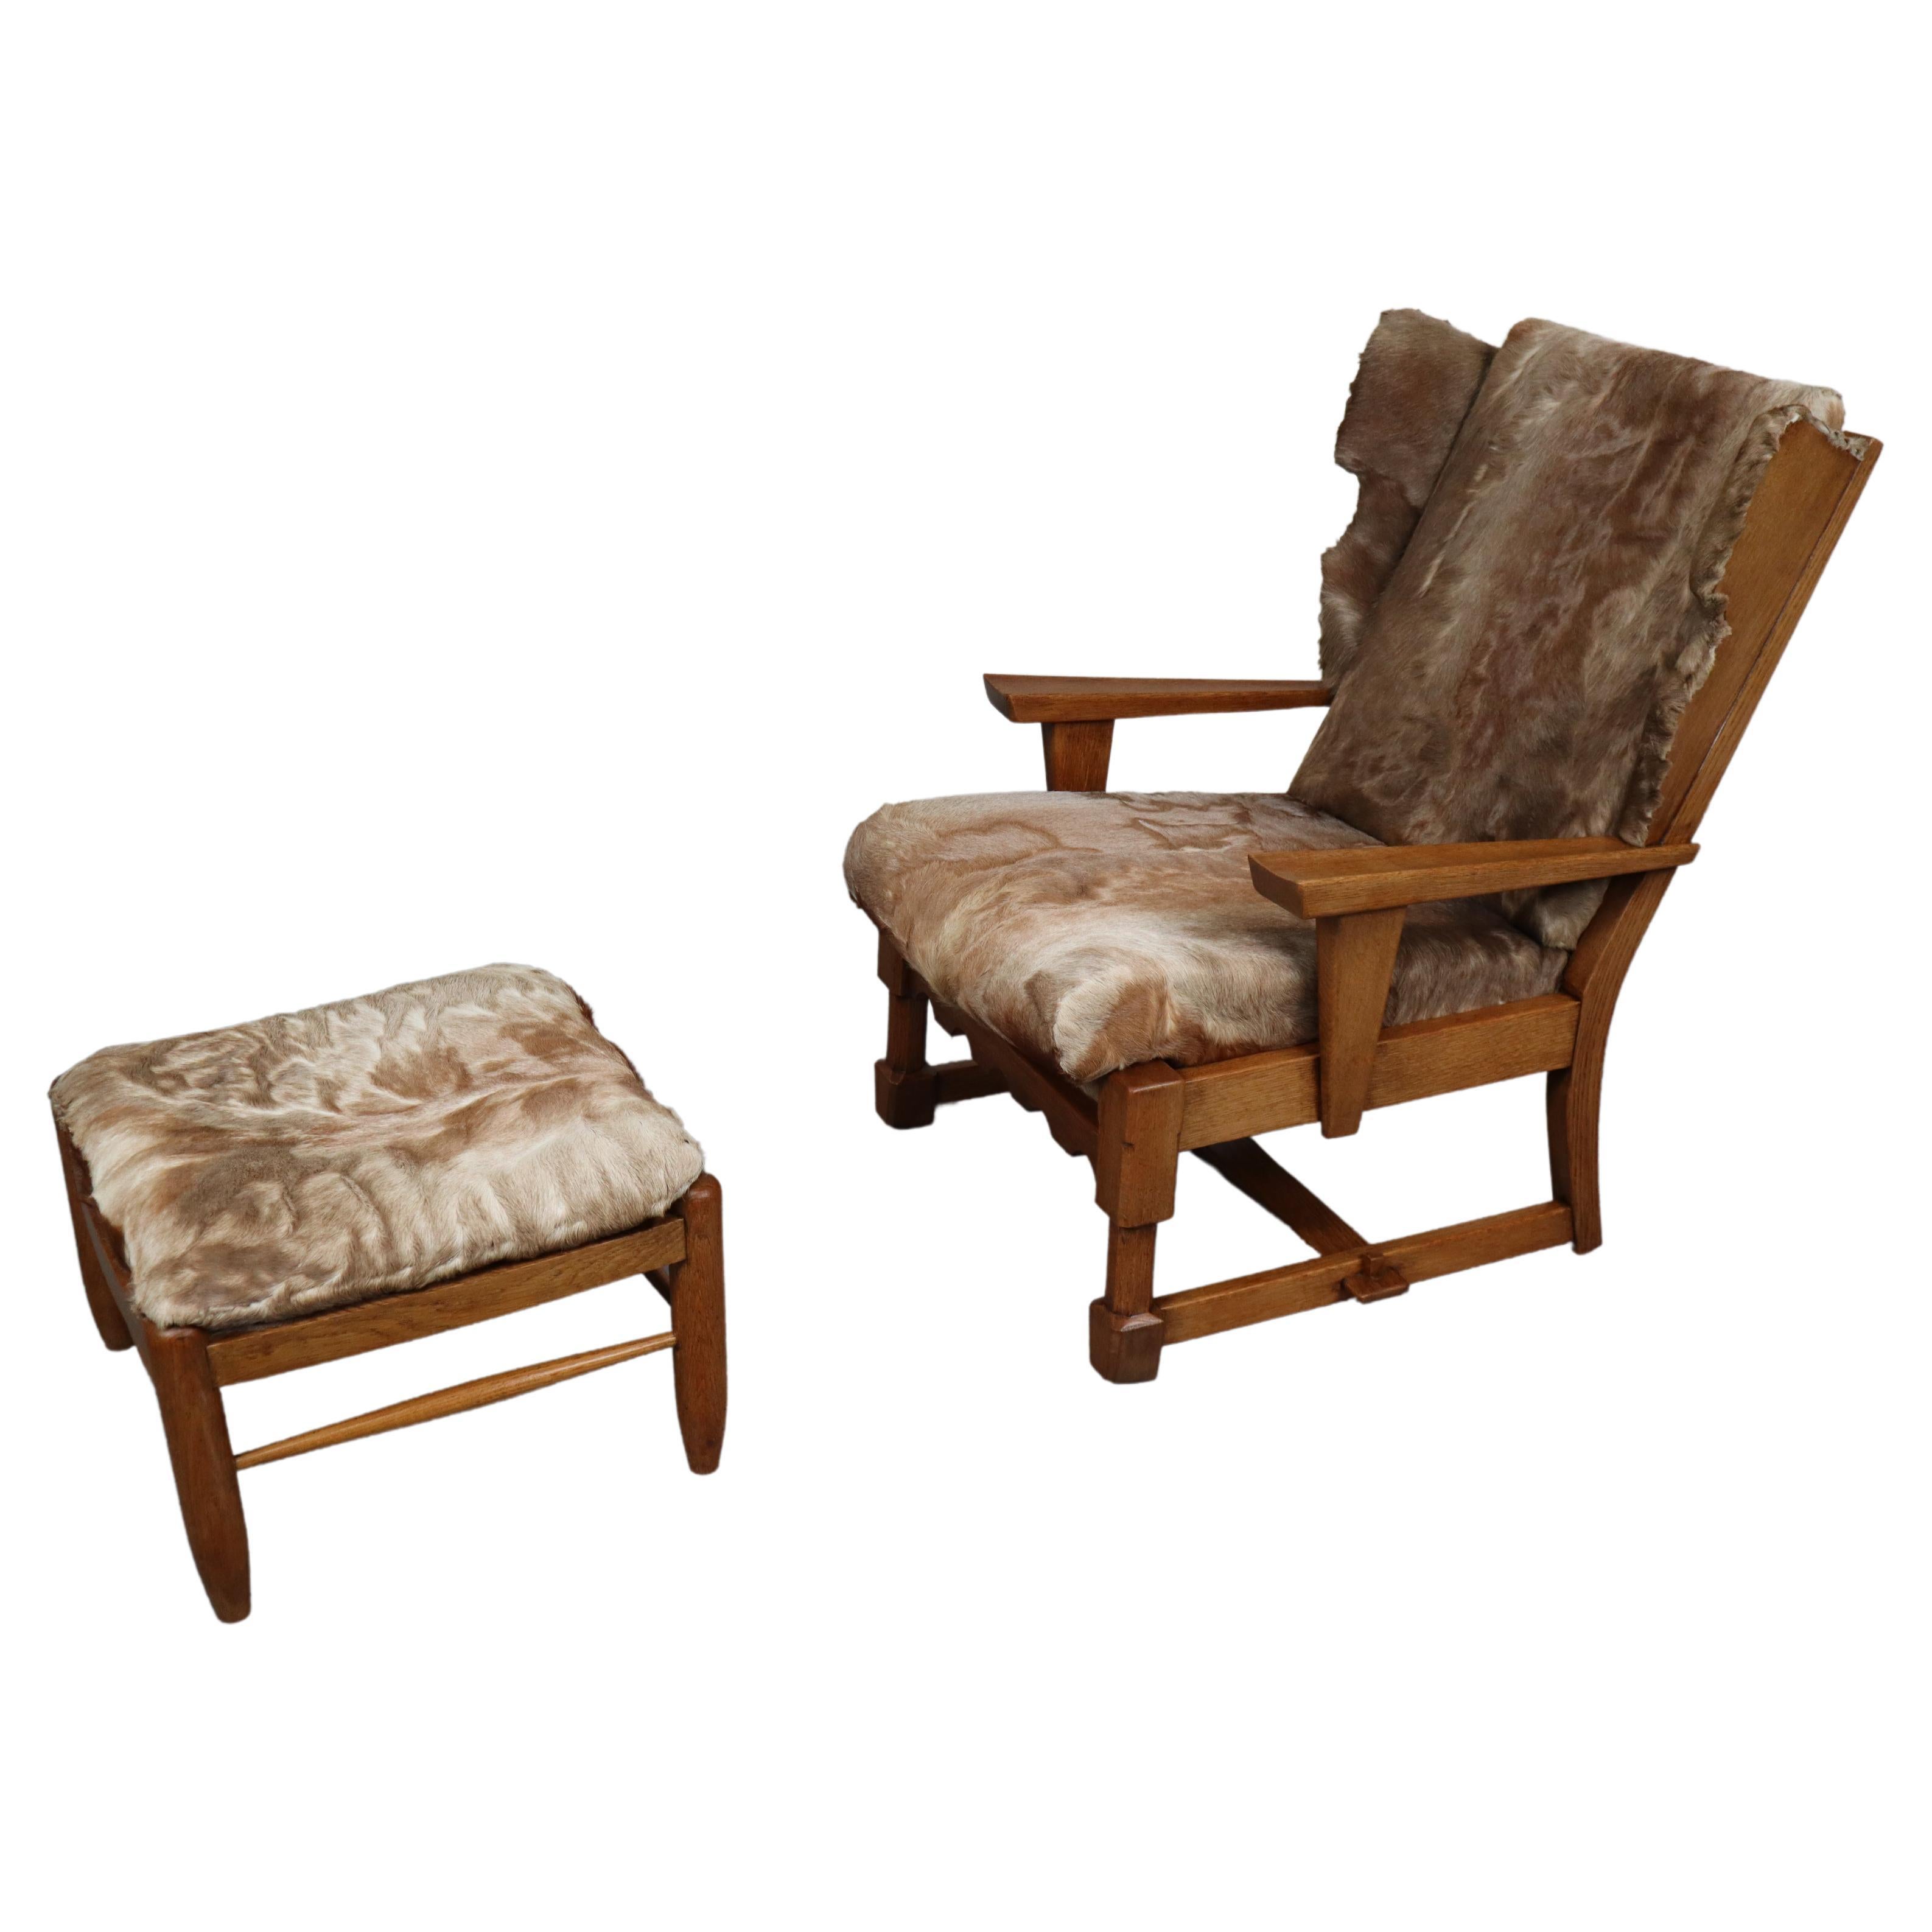 Brutalist Oak Lounge Chair and Ottoman with Upholstery in Goat Hide